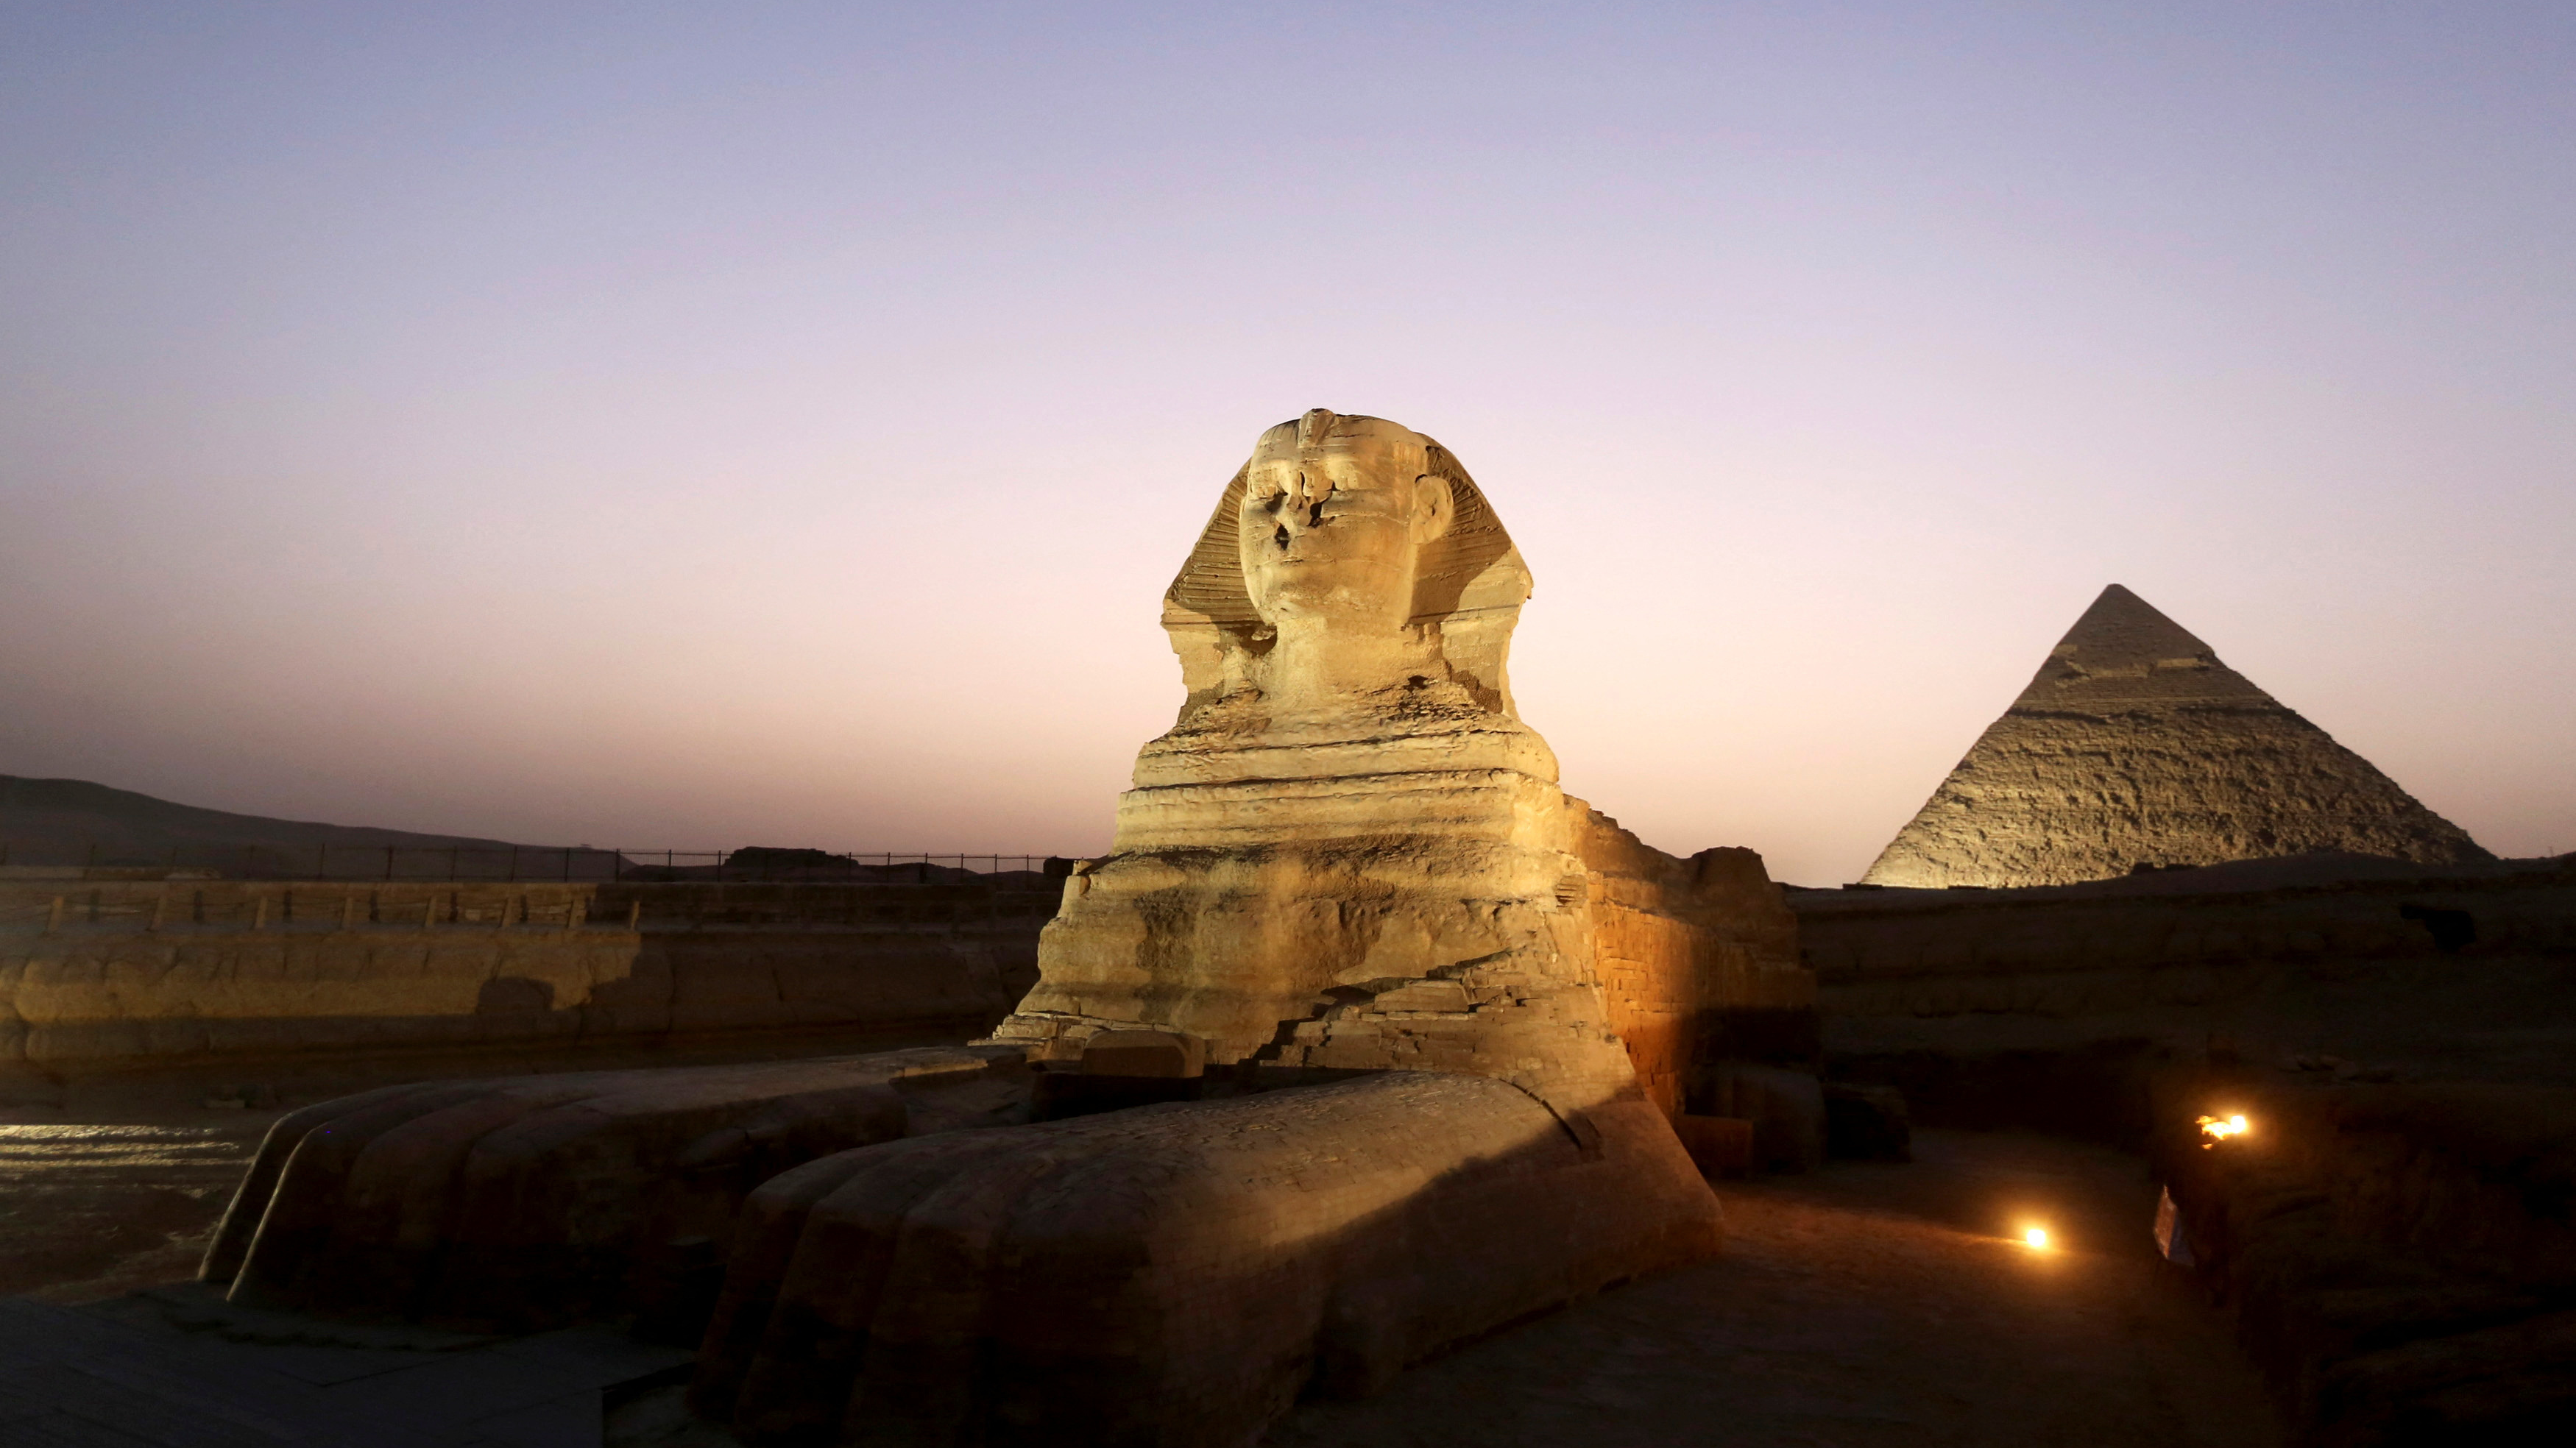 The Great Sphinx and pyramids lure visitors from around the globe. /Mohamed Abd El Ghany/Reuters